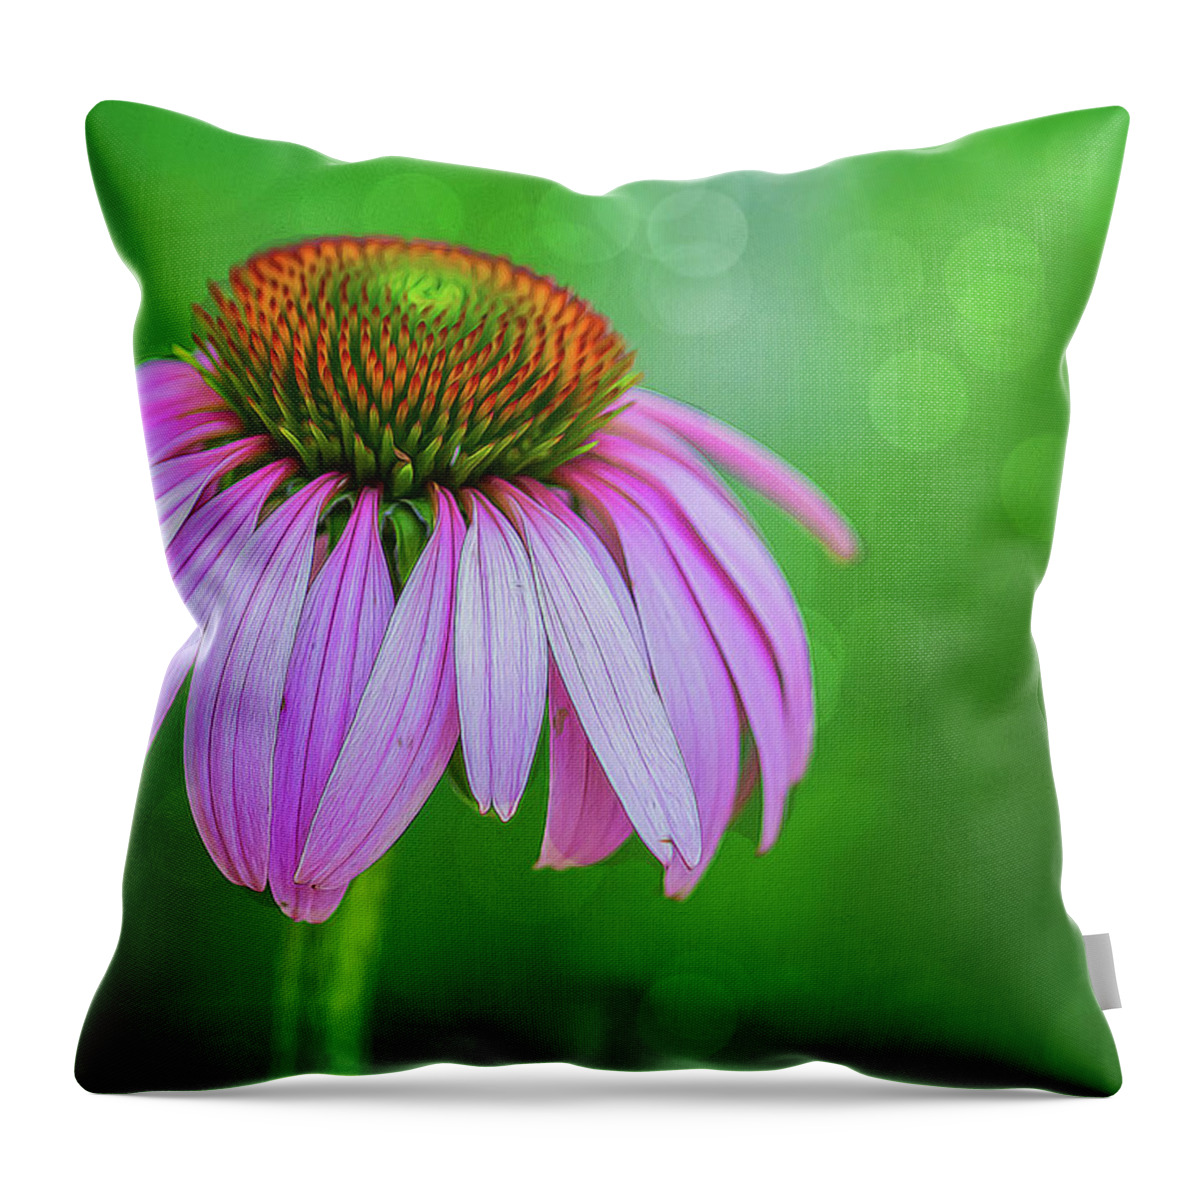 Flower Throw Pillow featuring the photograph Glowing Cone Flower by Cathy Kovarik